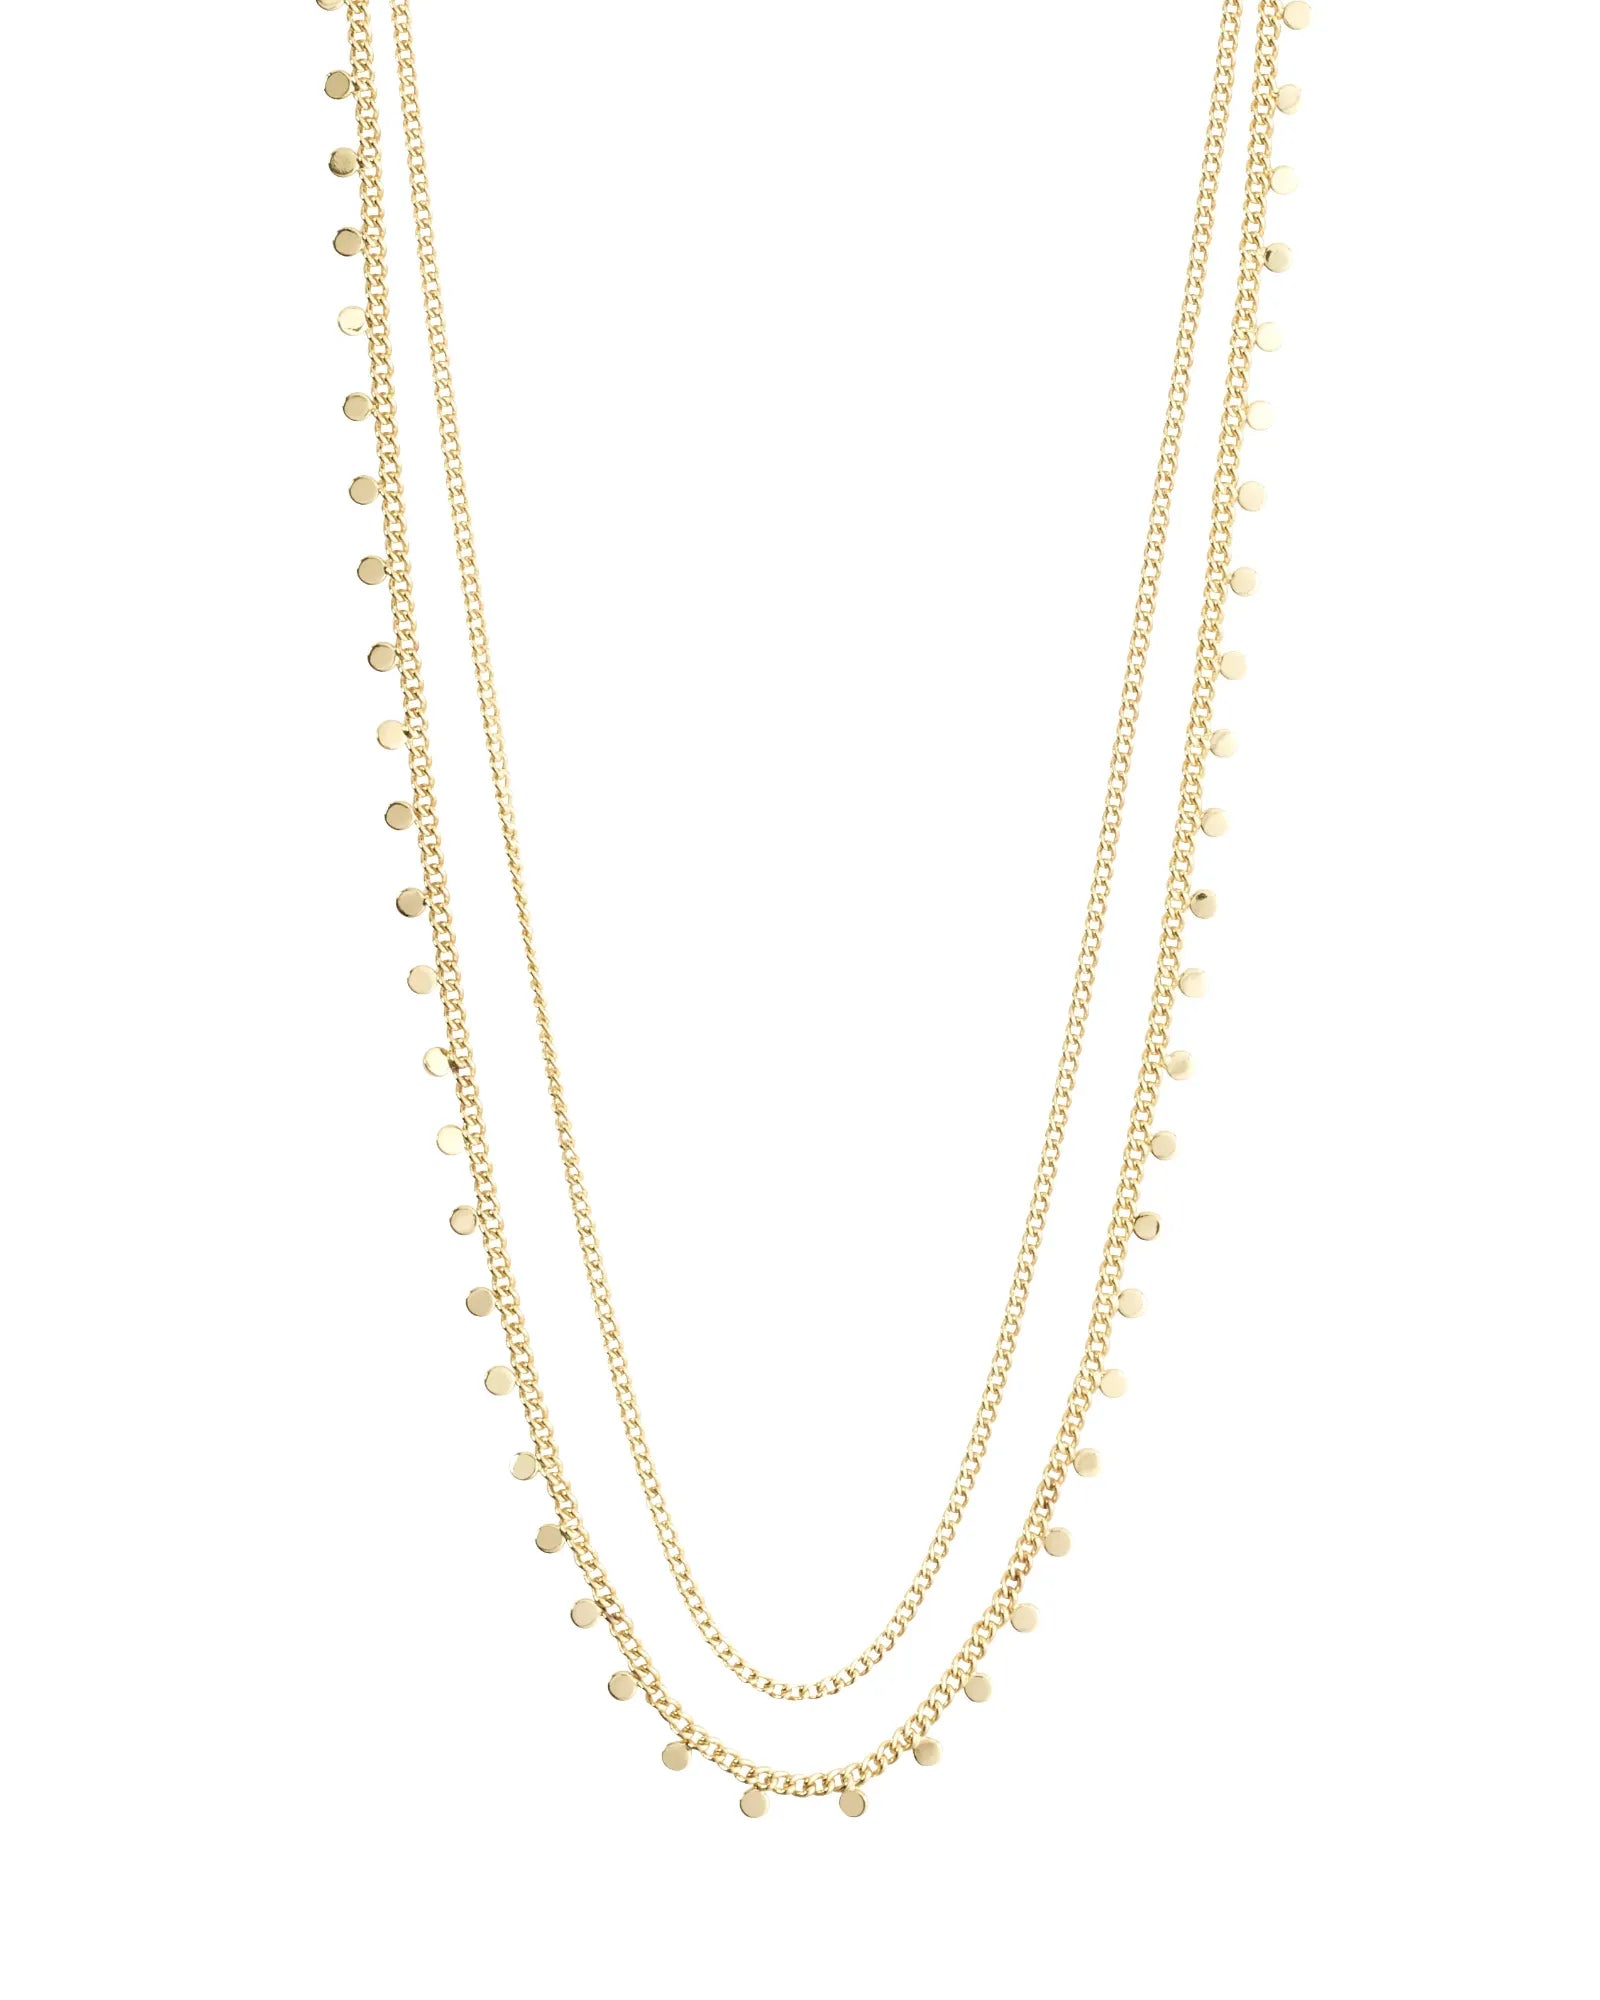 BLOOM Recycled Necklace 2-in-1 - Gold Plated